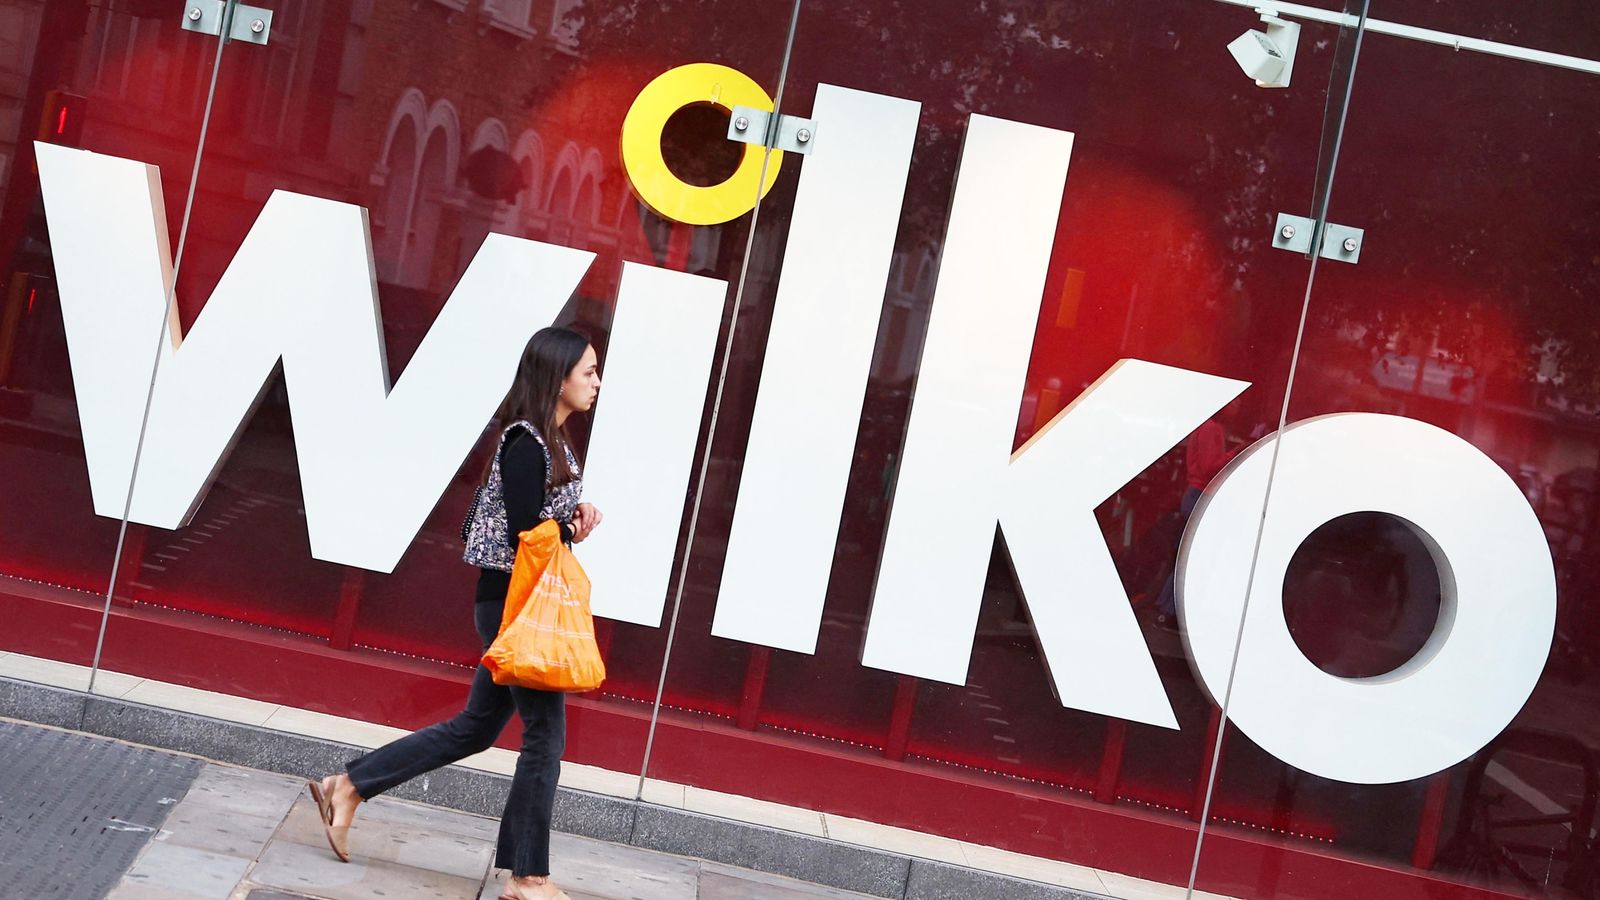 More Wilko job losses loom as Putman rescue deal collapses